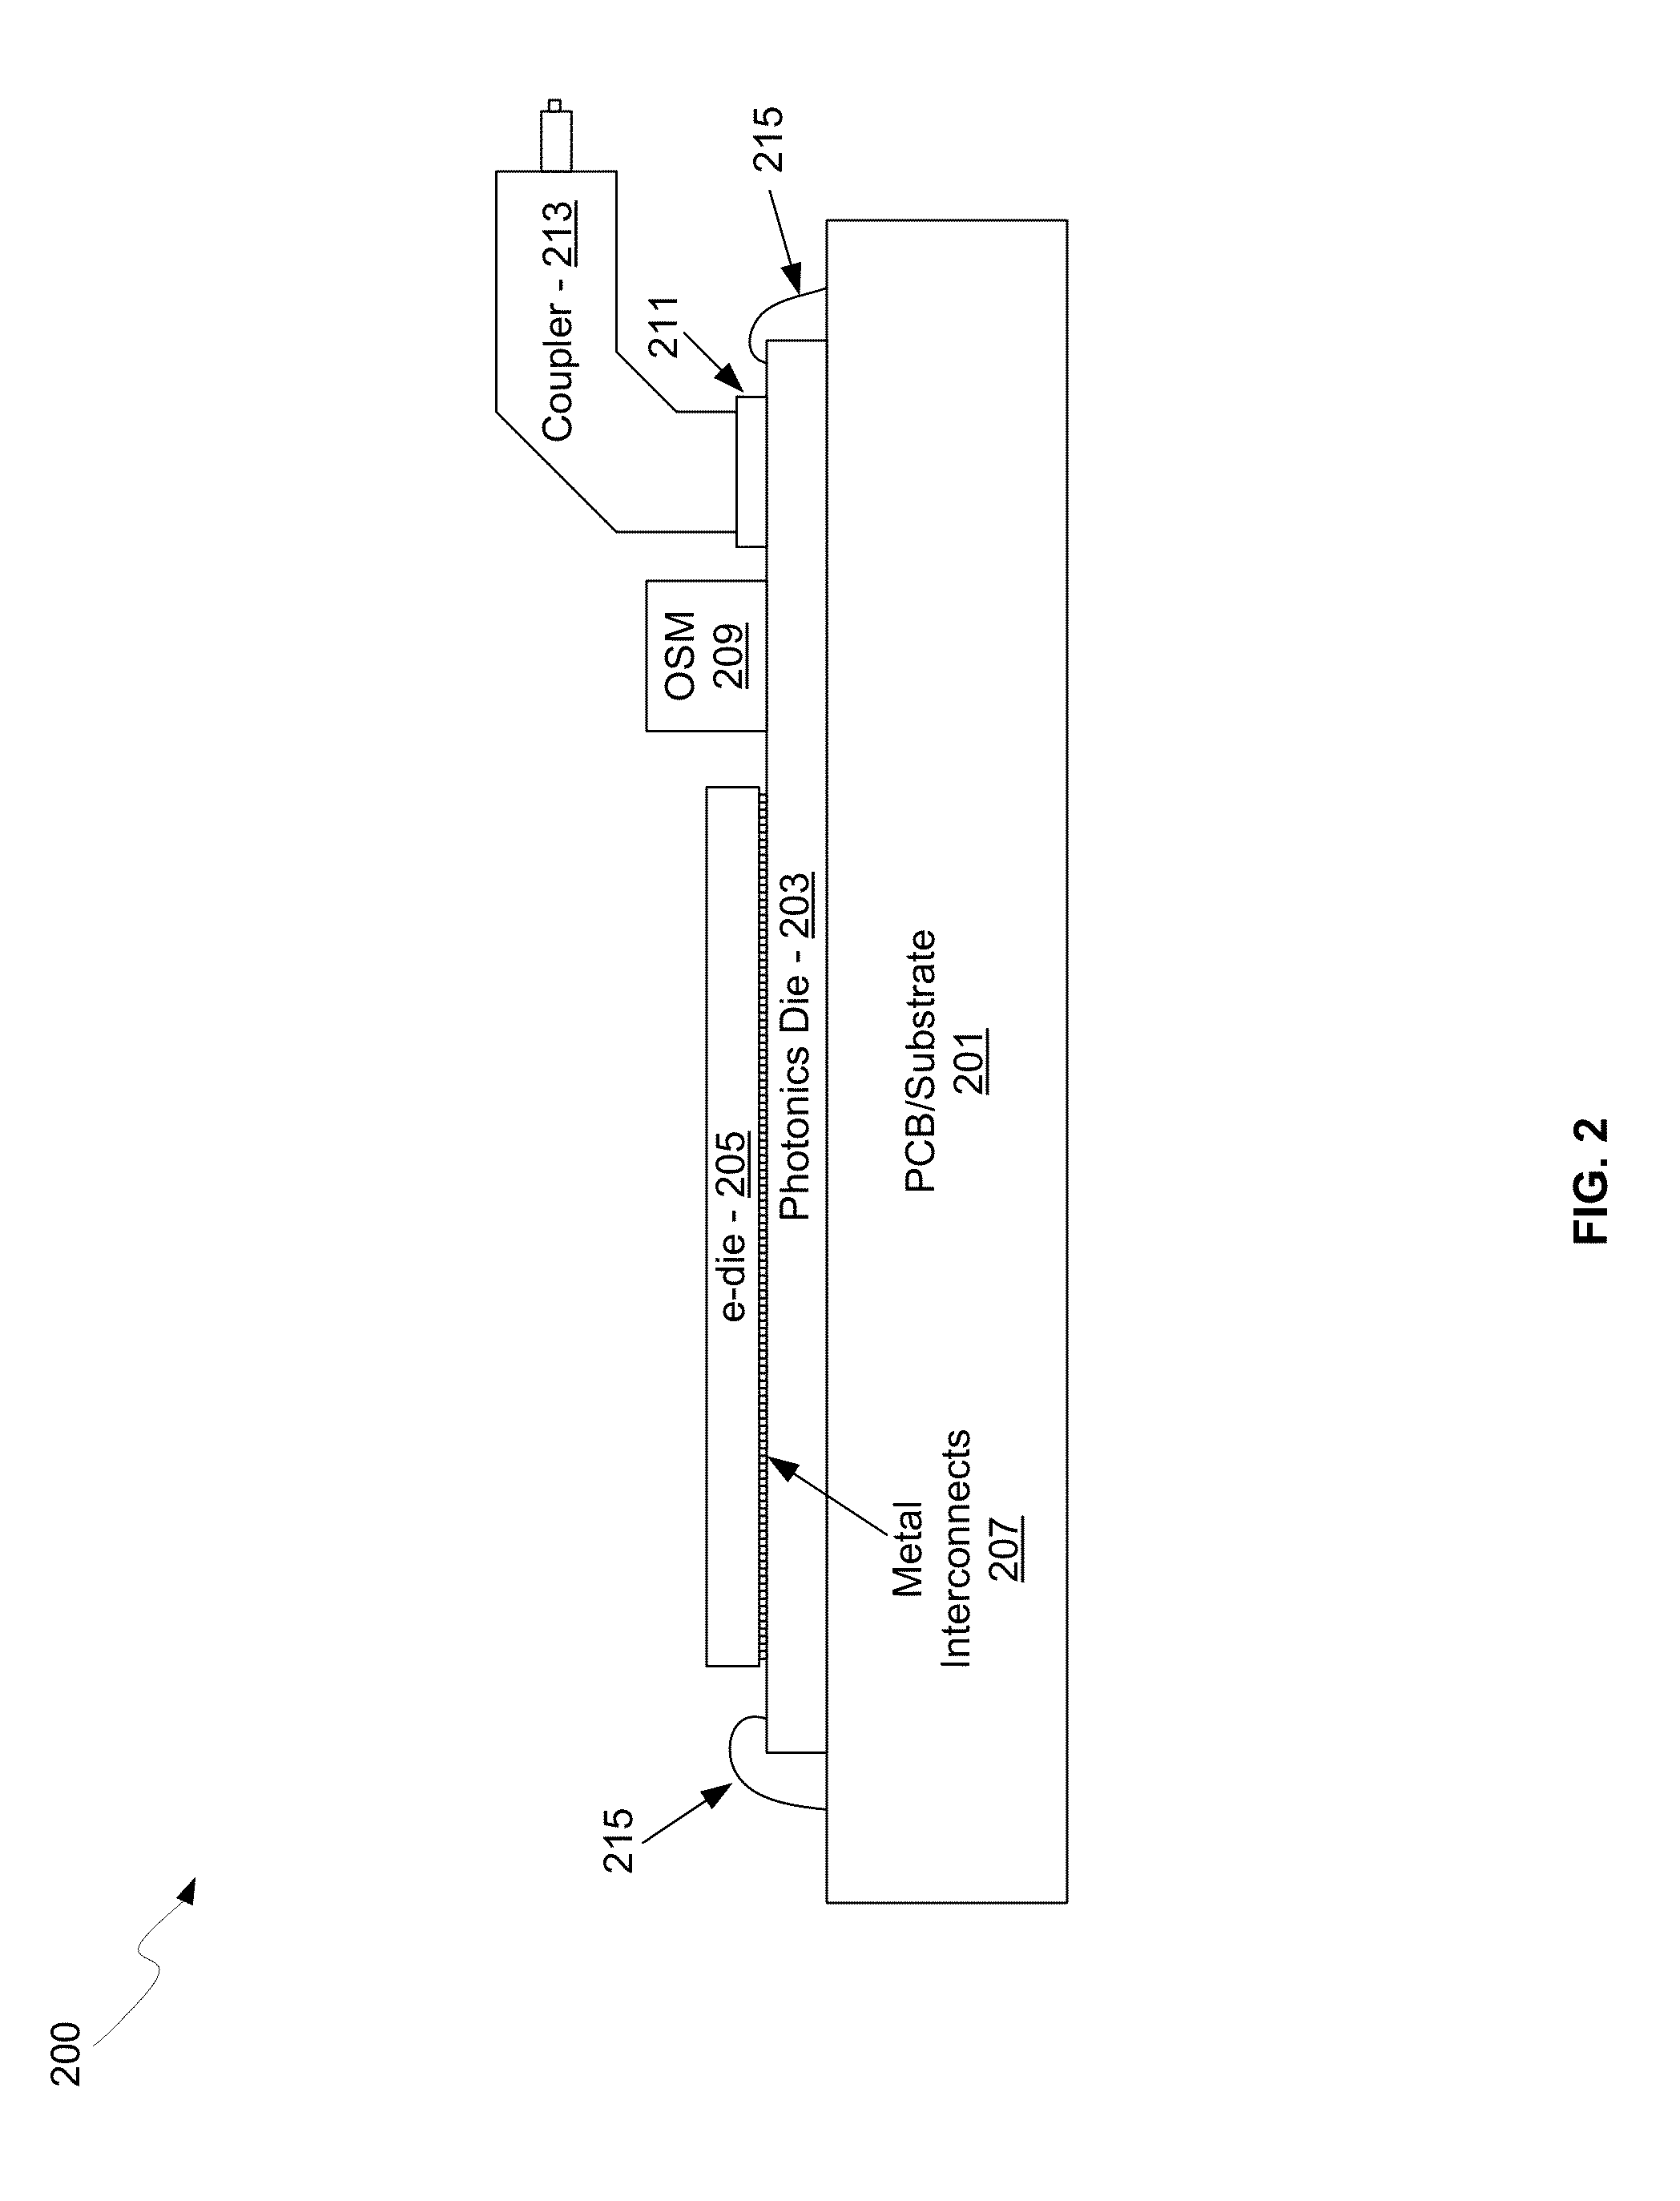 Method and system for an optical coupler for silicon photonics devices